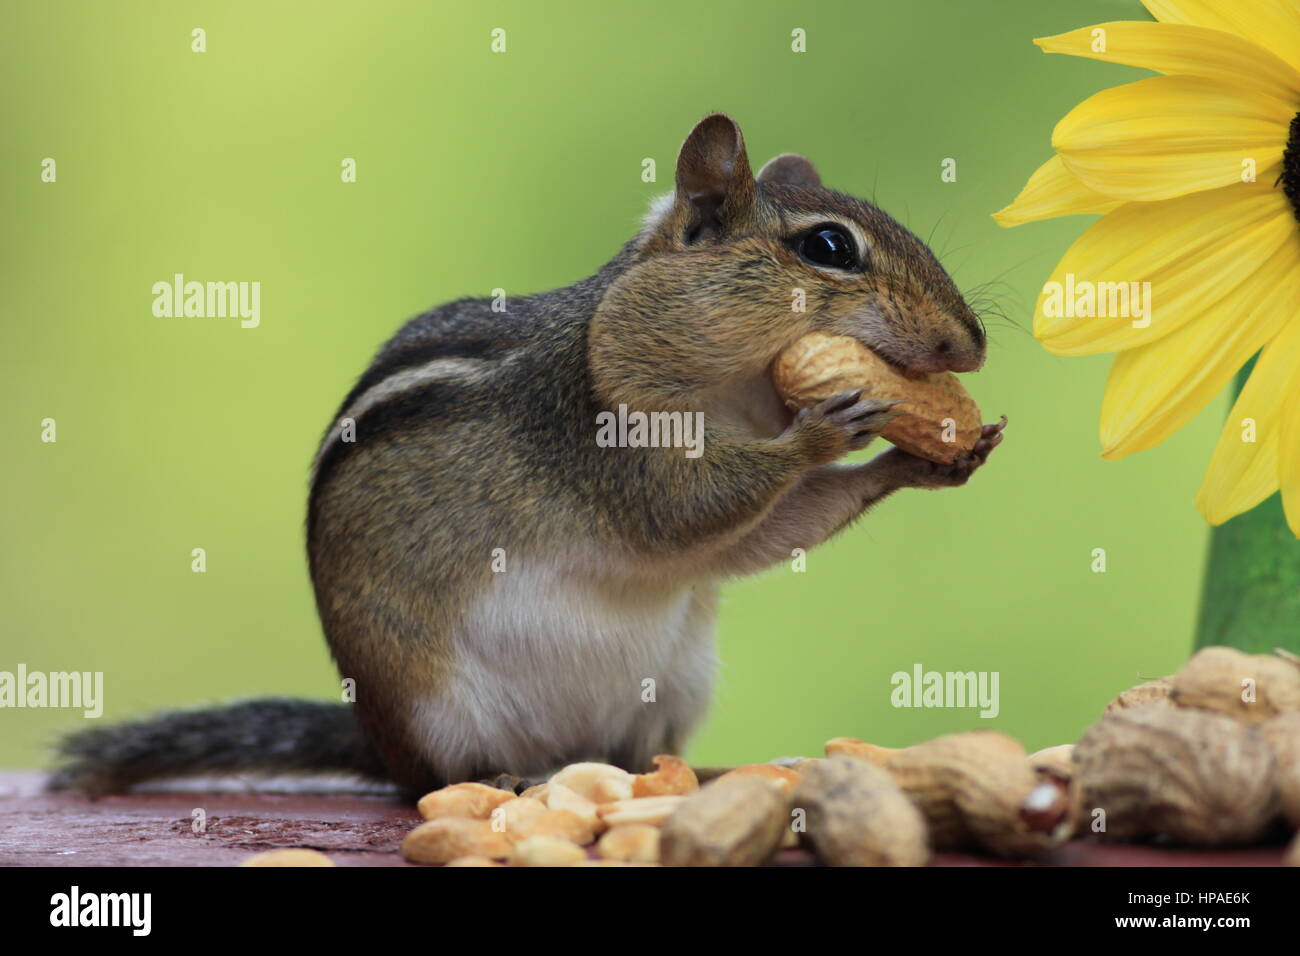 Adorable Eastern Chipmunk loves to eat peanuts and stands next to a lemon sunflower with a beautiful green background Stock Photo